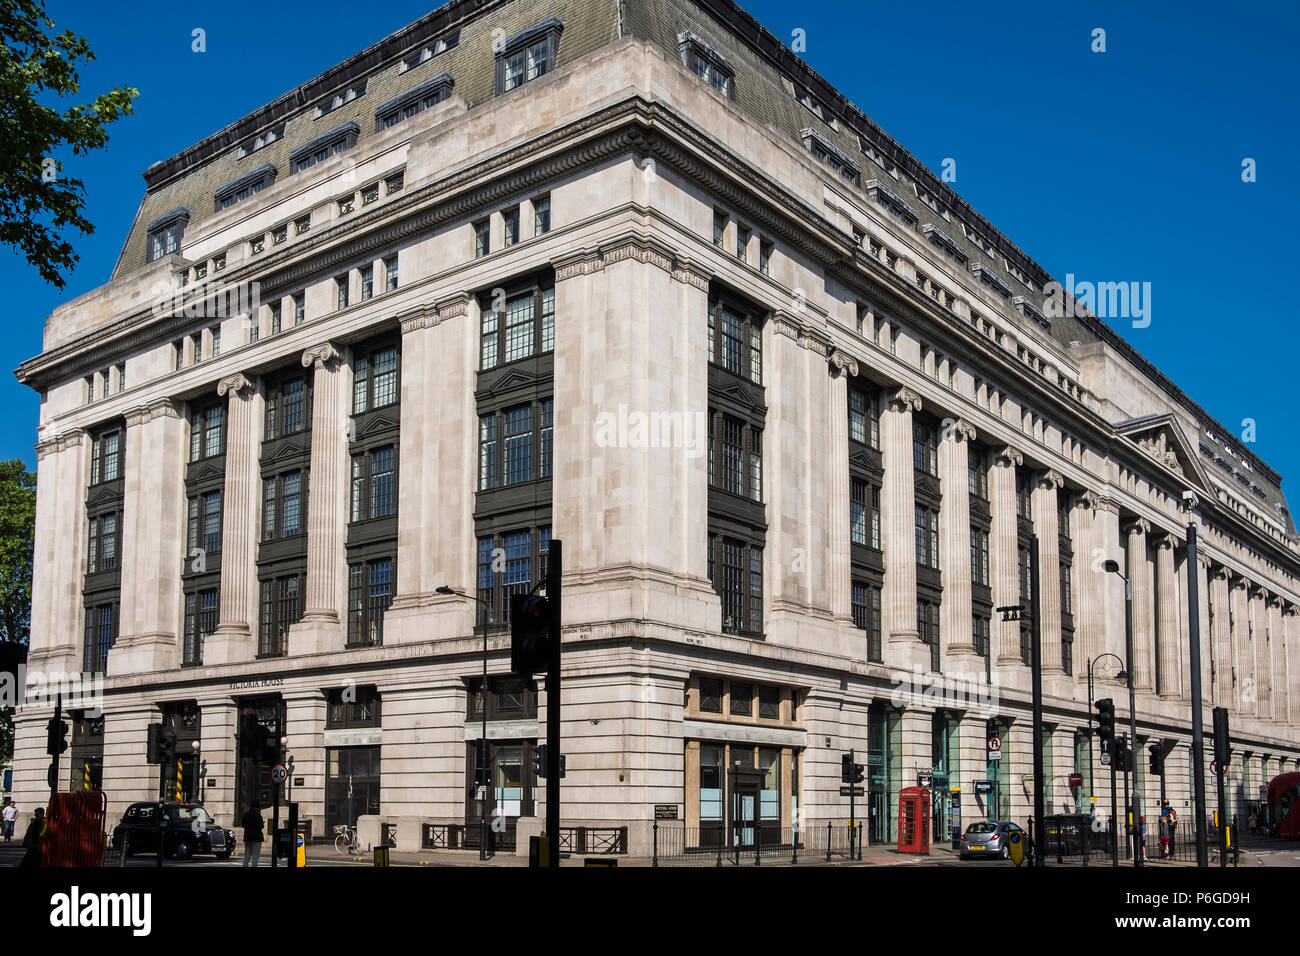 Victoria House was constructed in the 1920s, and for many decades occupied by the Liverpool Victoria Friendly Society, London, England, U.K. Stock Photo